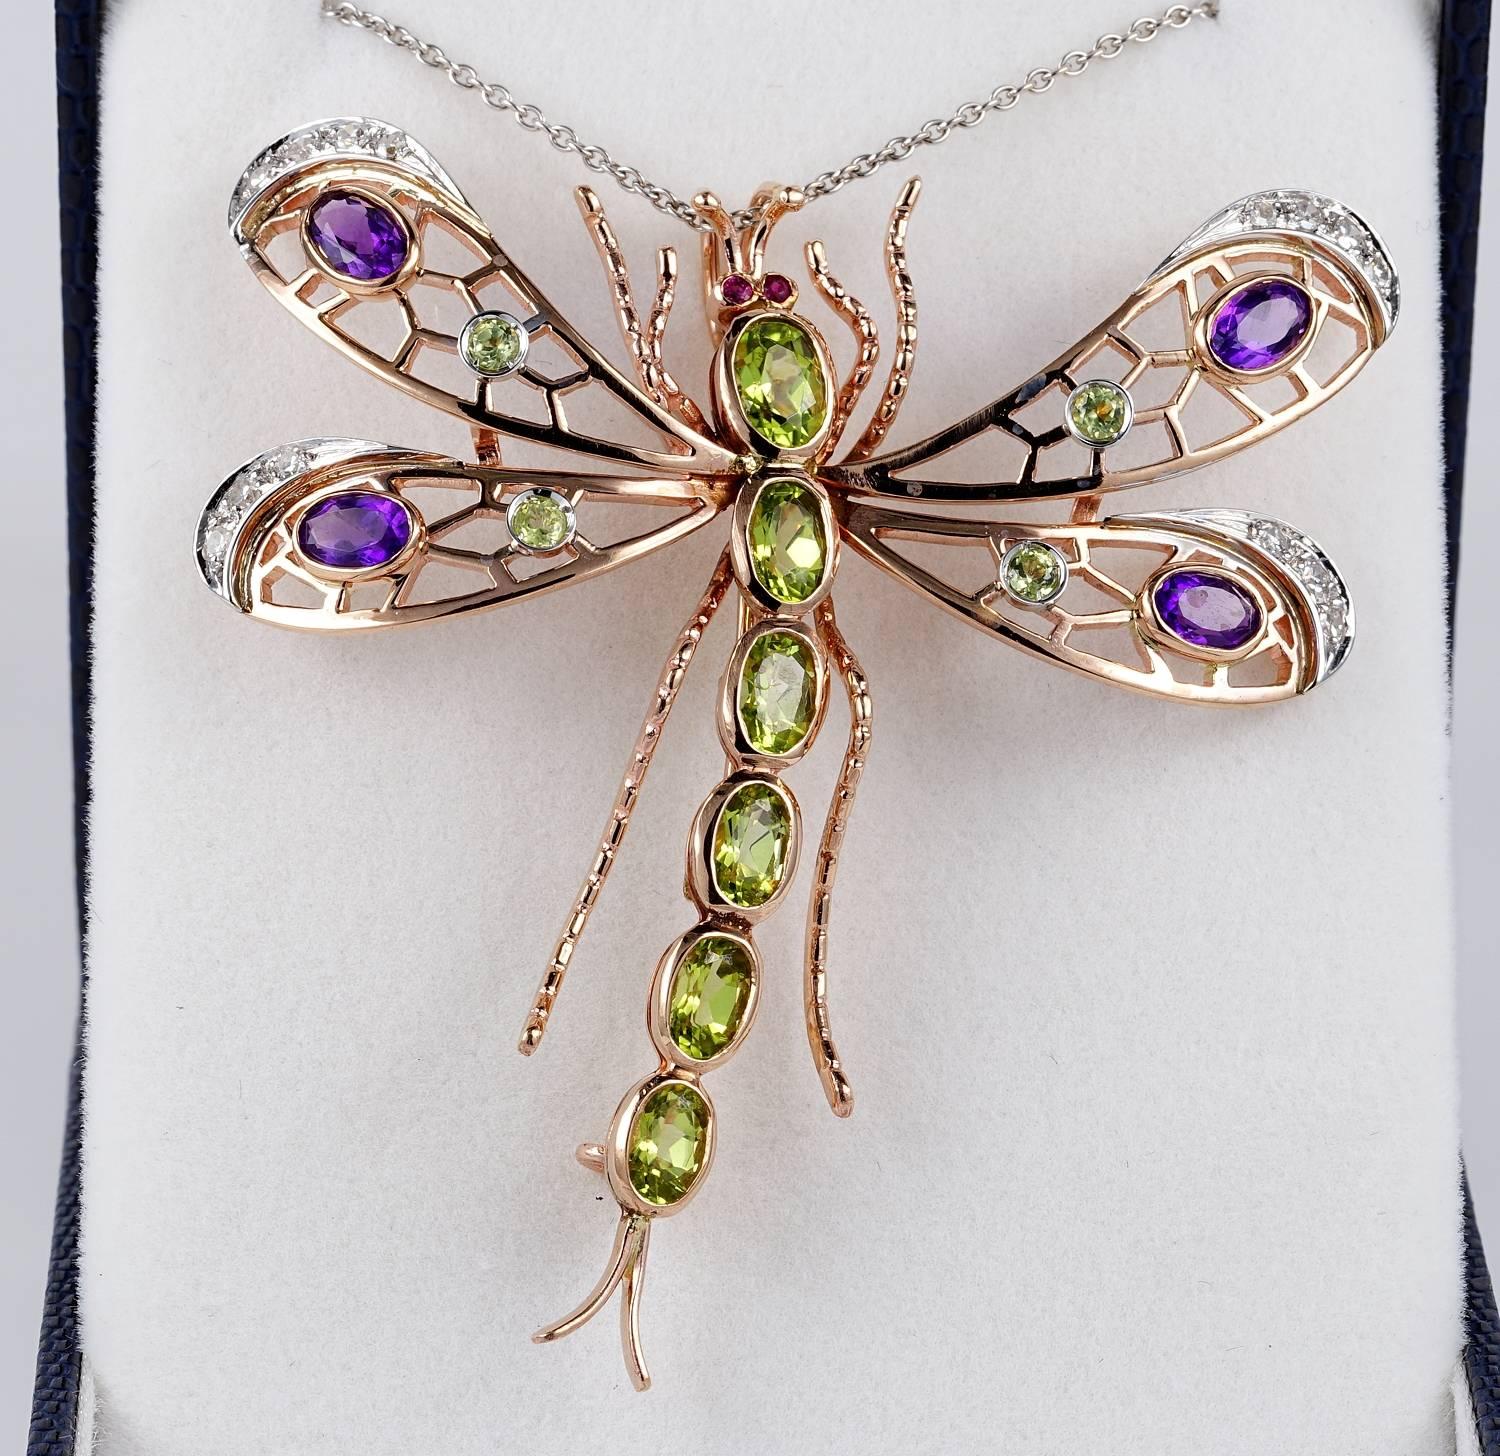 An impressive large sized Dragonfly brooch beautifully hand crafted of solid 9 kT solid gold - marked
Outstanding pierced work skilfully executed enhanced by Natural Amethysts and Peridots with Diamonds portions
All the Sufraggette colours
This is a